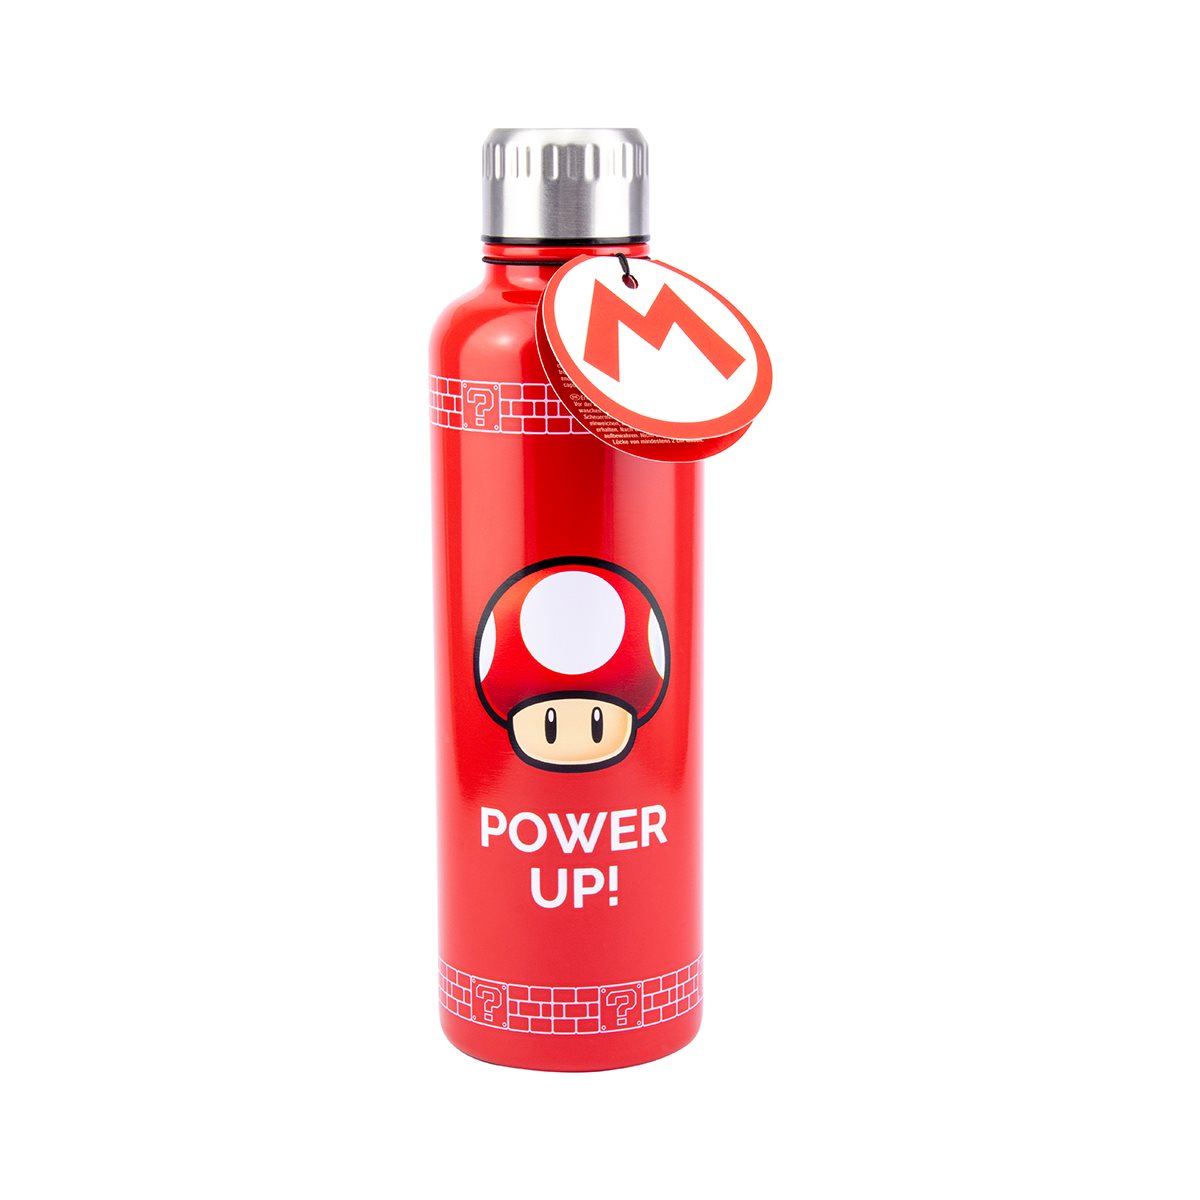 Super Mario 16 oz. Metal Water Bottle with Straw